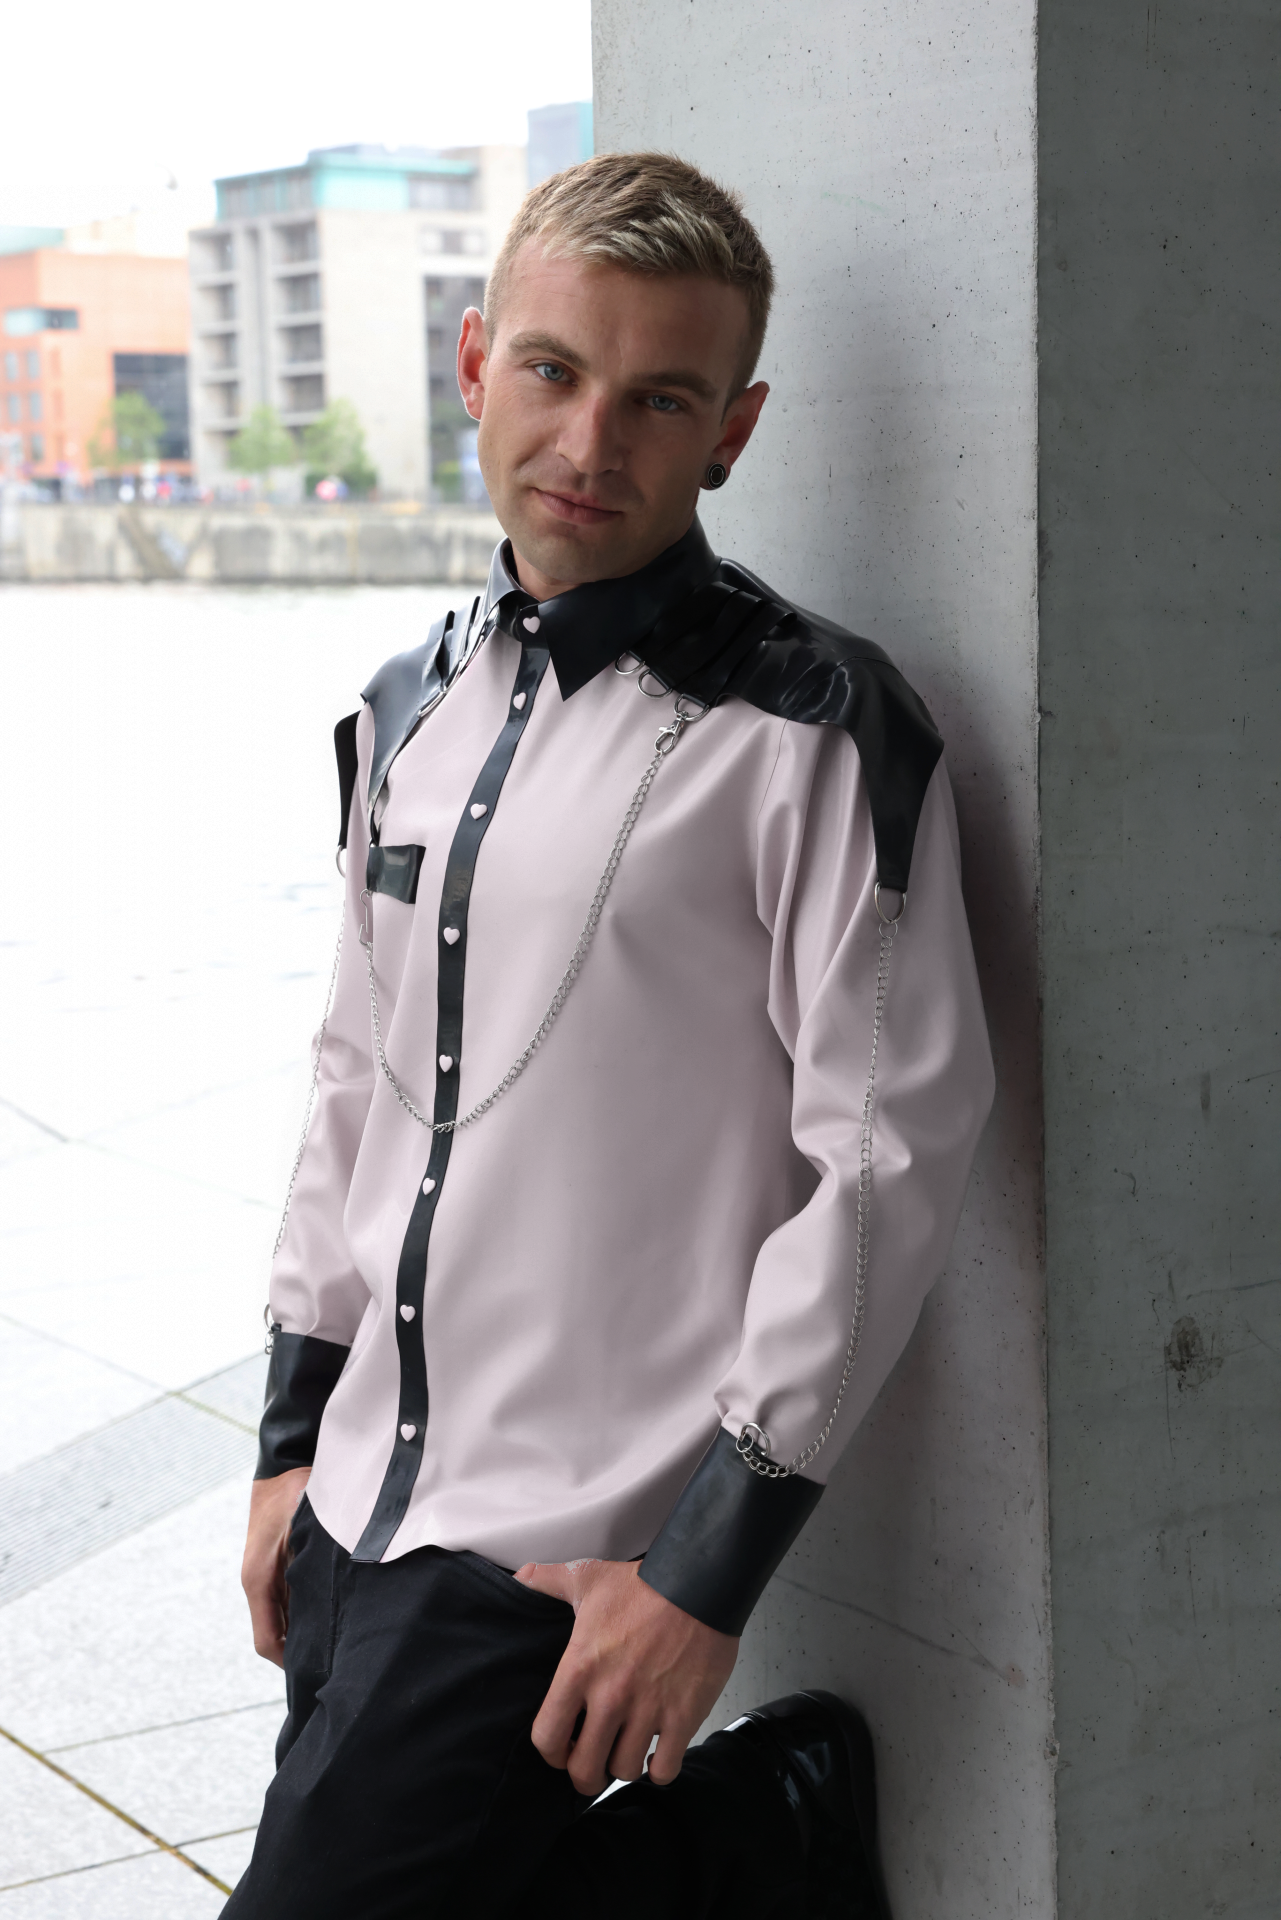 "Steampunk" Men's latex shirt with shoulder pads and chains